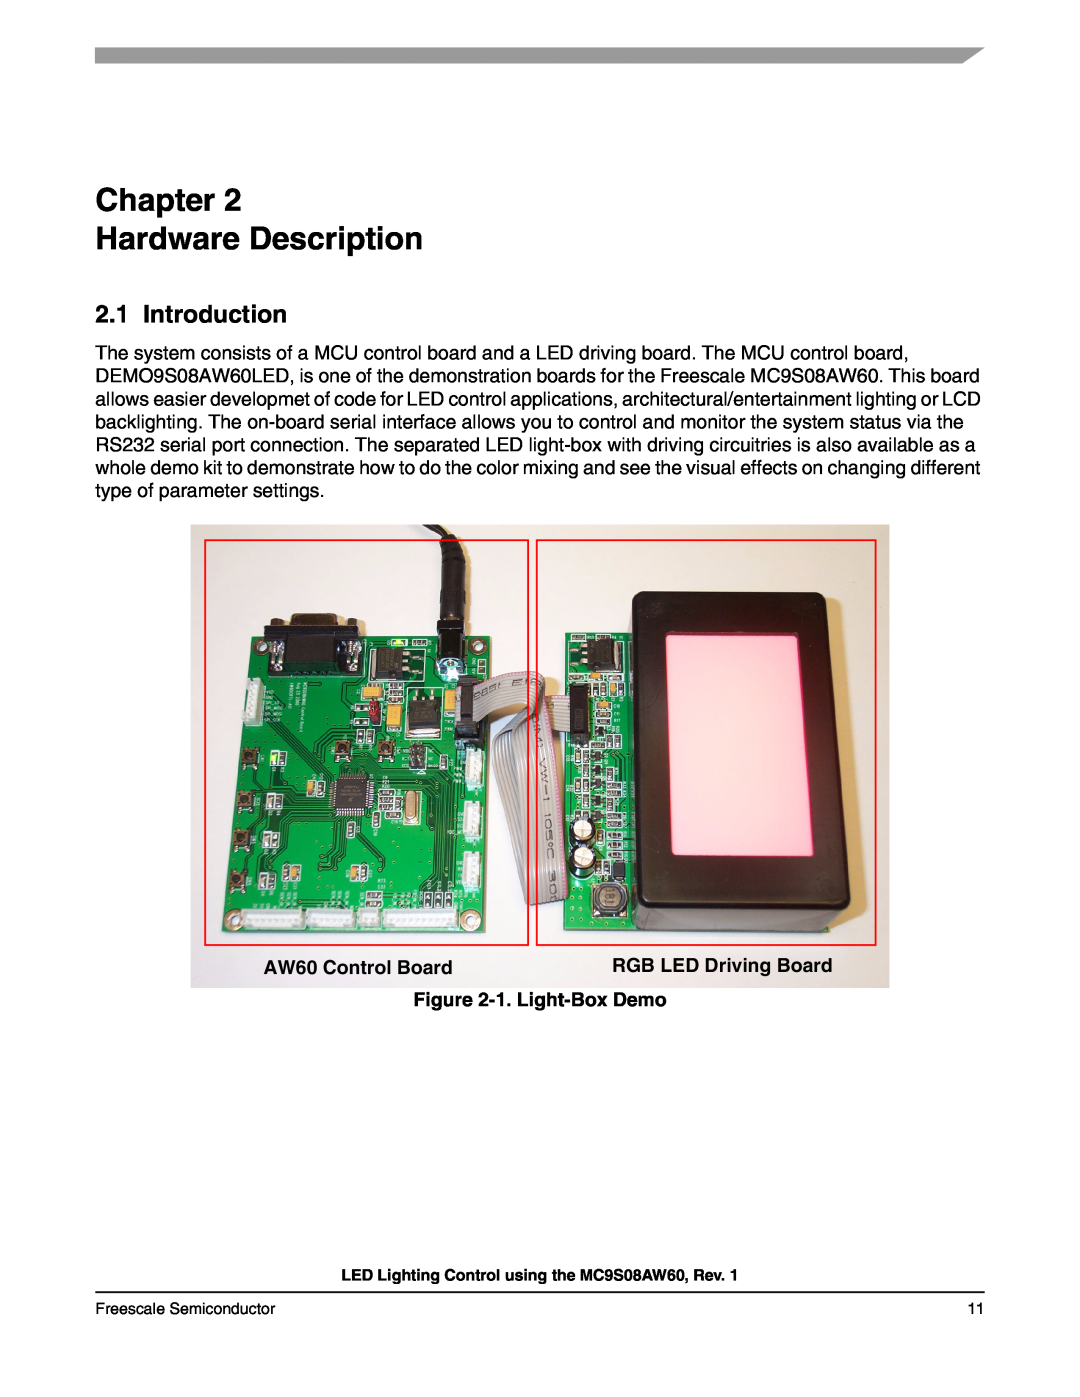 Freescale Semiconductor S08 manual Chapter Hardware Description, Introduction, AW60 Control Board, 1. Light-Box Demo 